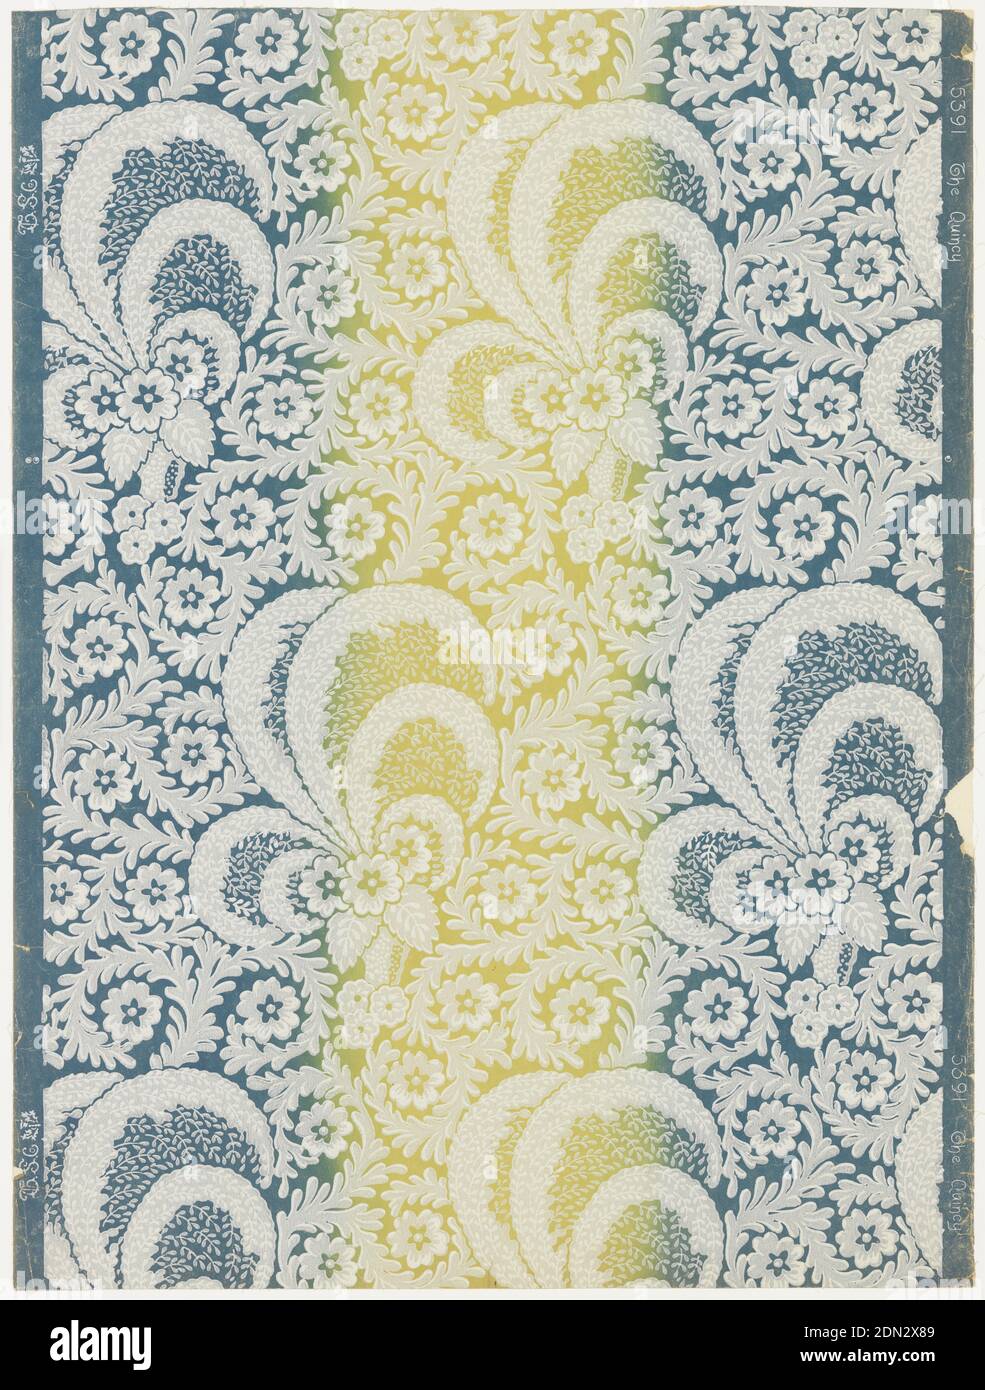 The Quincy, Thomas Strahan & Co., Manufactory, Machine-printed paper, Full width with nearly two repeats of design. Large clusters of flowers and wind-blown foliage, with space-filling scrolls of foliage and single flower-forms on smaller scale. Irise or rainbow ground varies from blue to yellow and back to blue, in vertical stripes. Printed in white on ground of blue, green and yellow., Chelsea, Massachusetts, USA, 1908, Wallcoverings, Sidewall, Sidewall Stock Photo